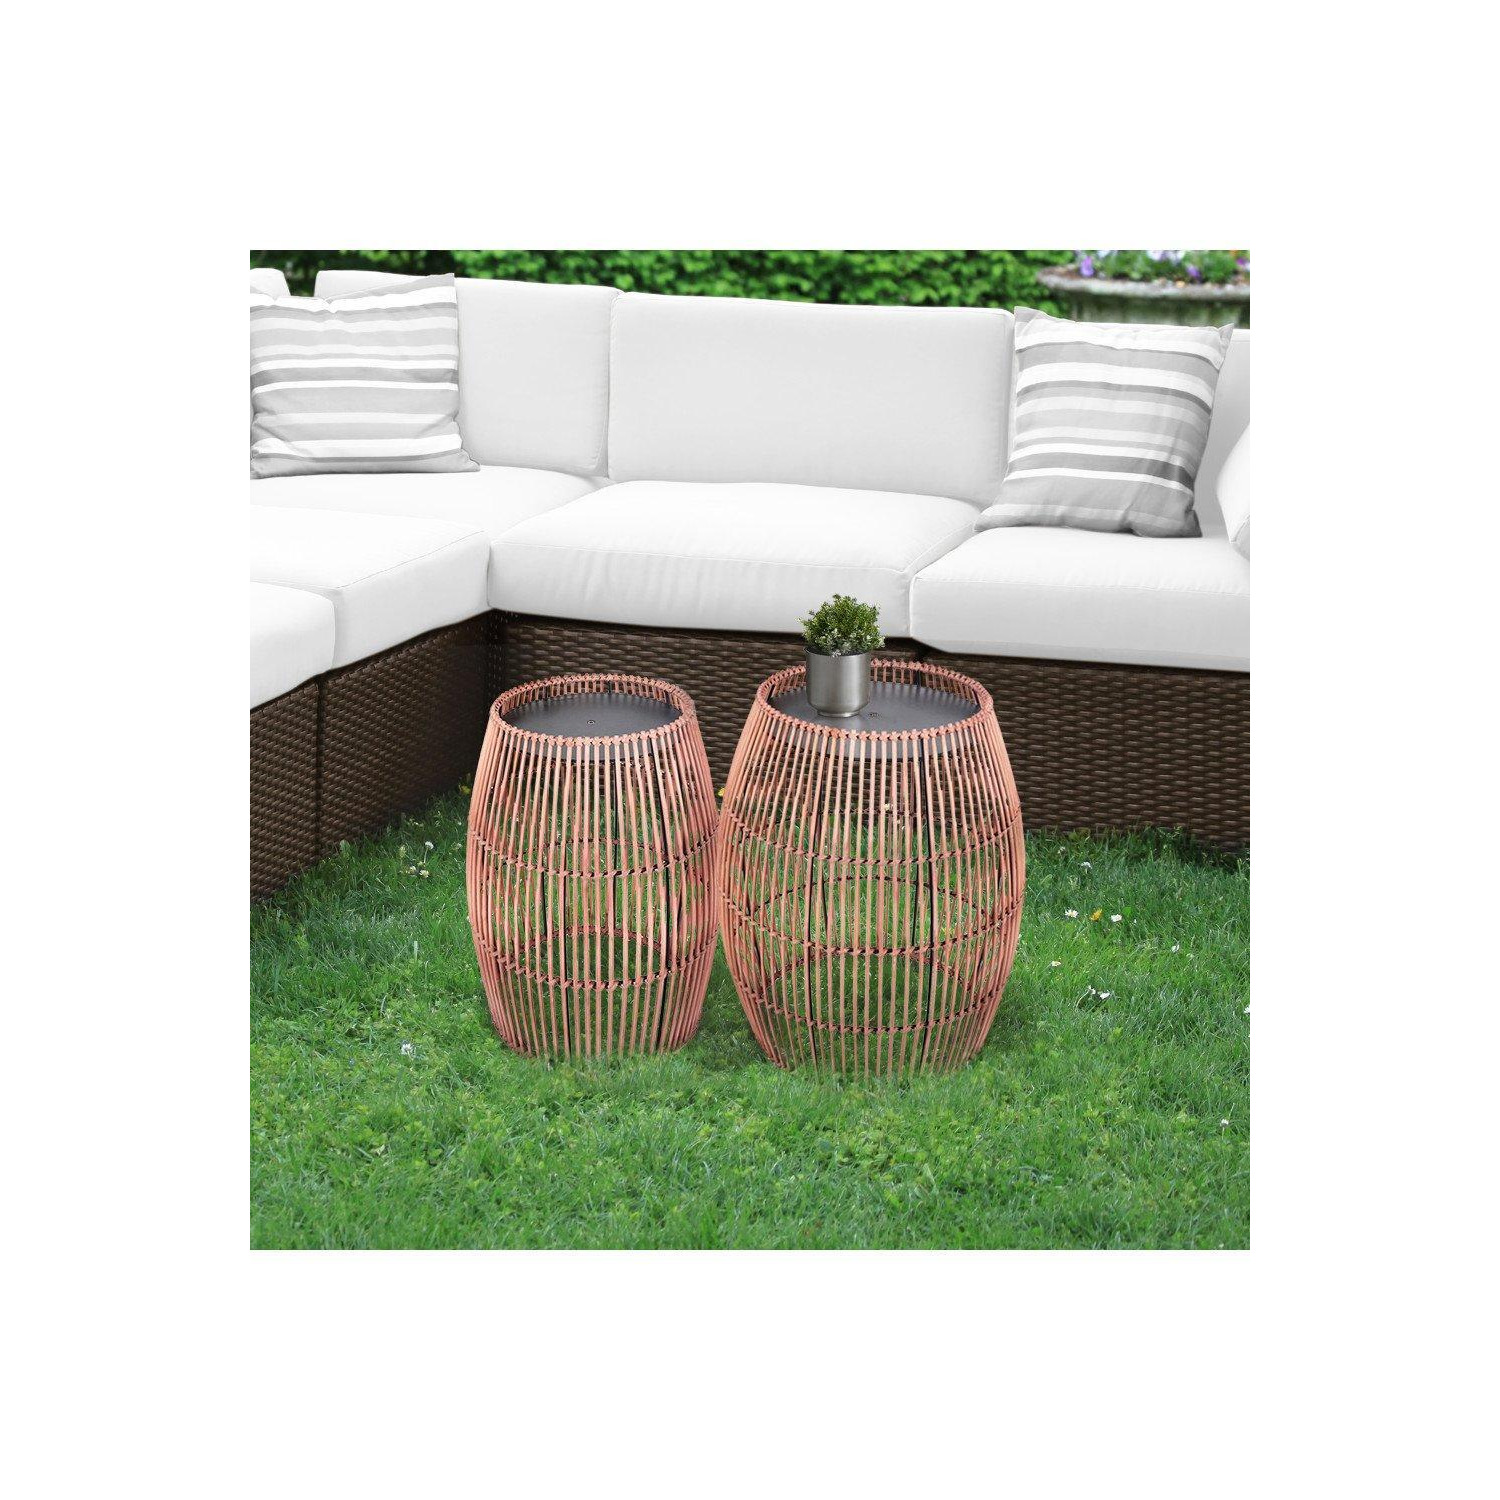 Teamson Home Outdoor Garden Furniture Large Round  Patio Side Table - image 1